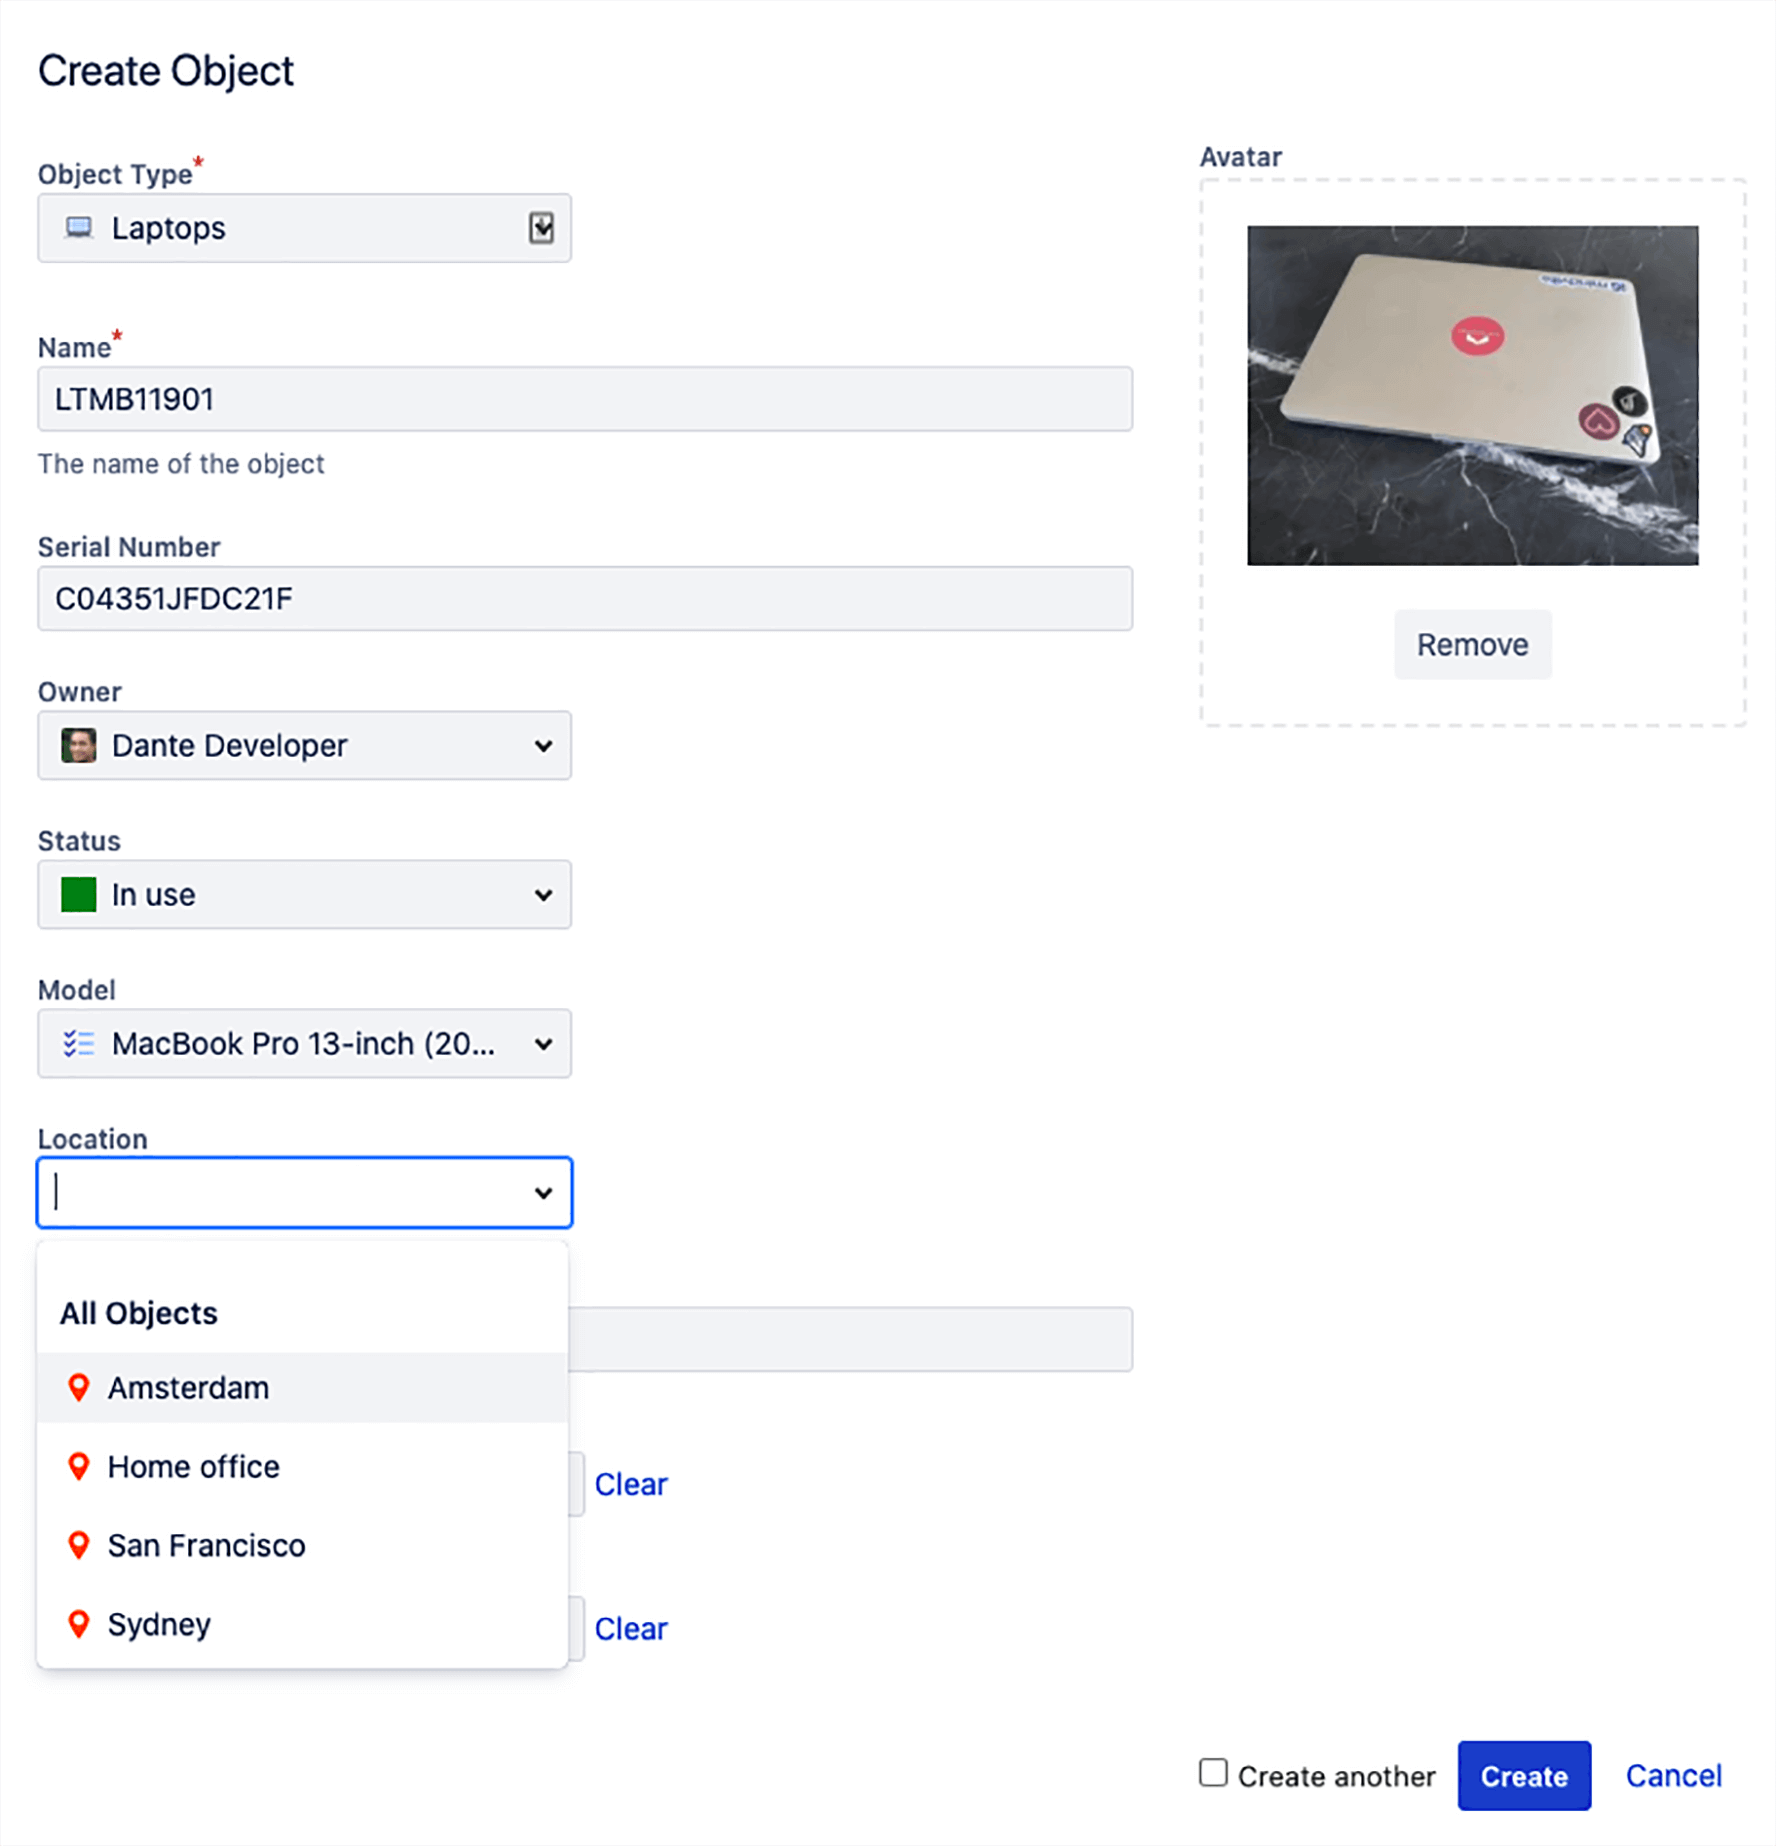 Screenshot example of an object reference in Jira Service Management